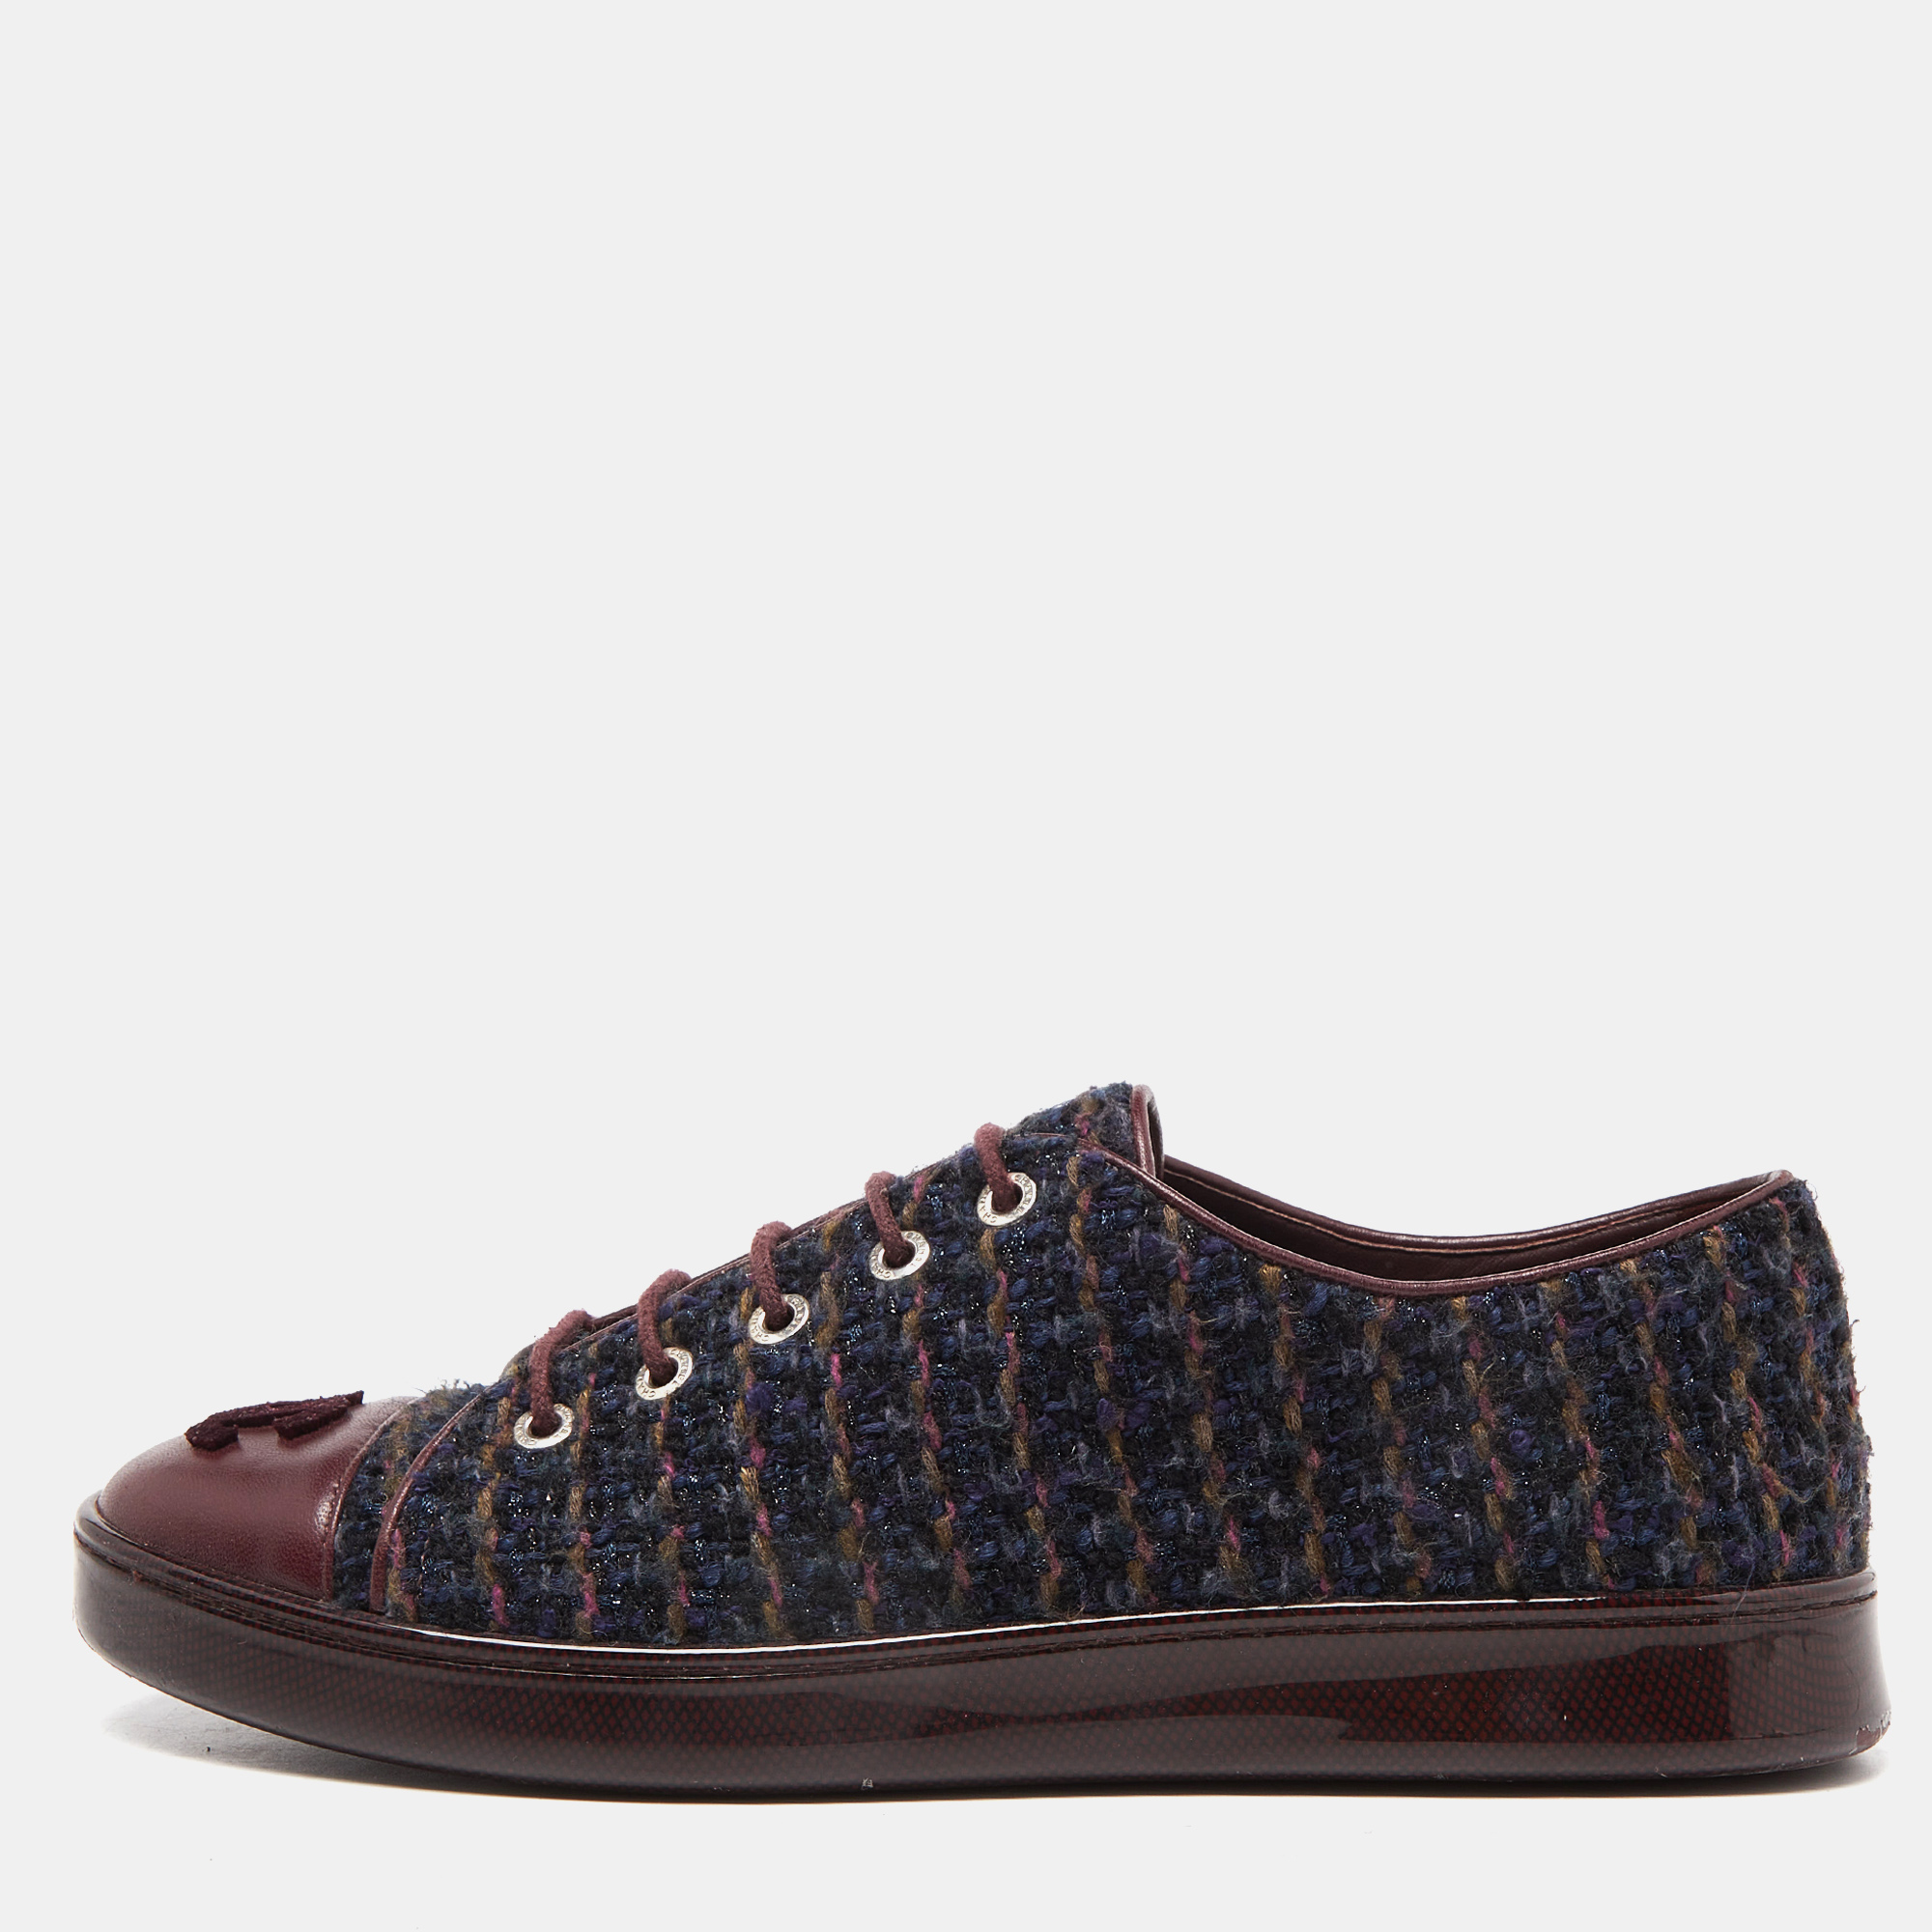 Chanel Burgundy Tweed and Leather CC Cap Toe Low Top Sneakers Size 37.5